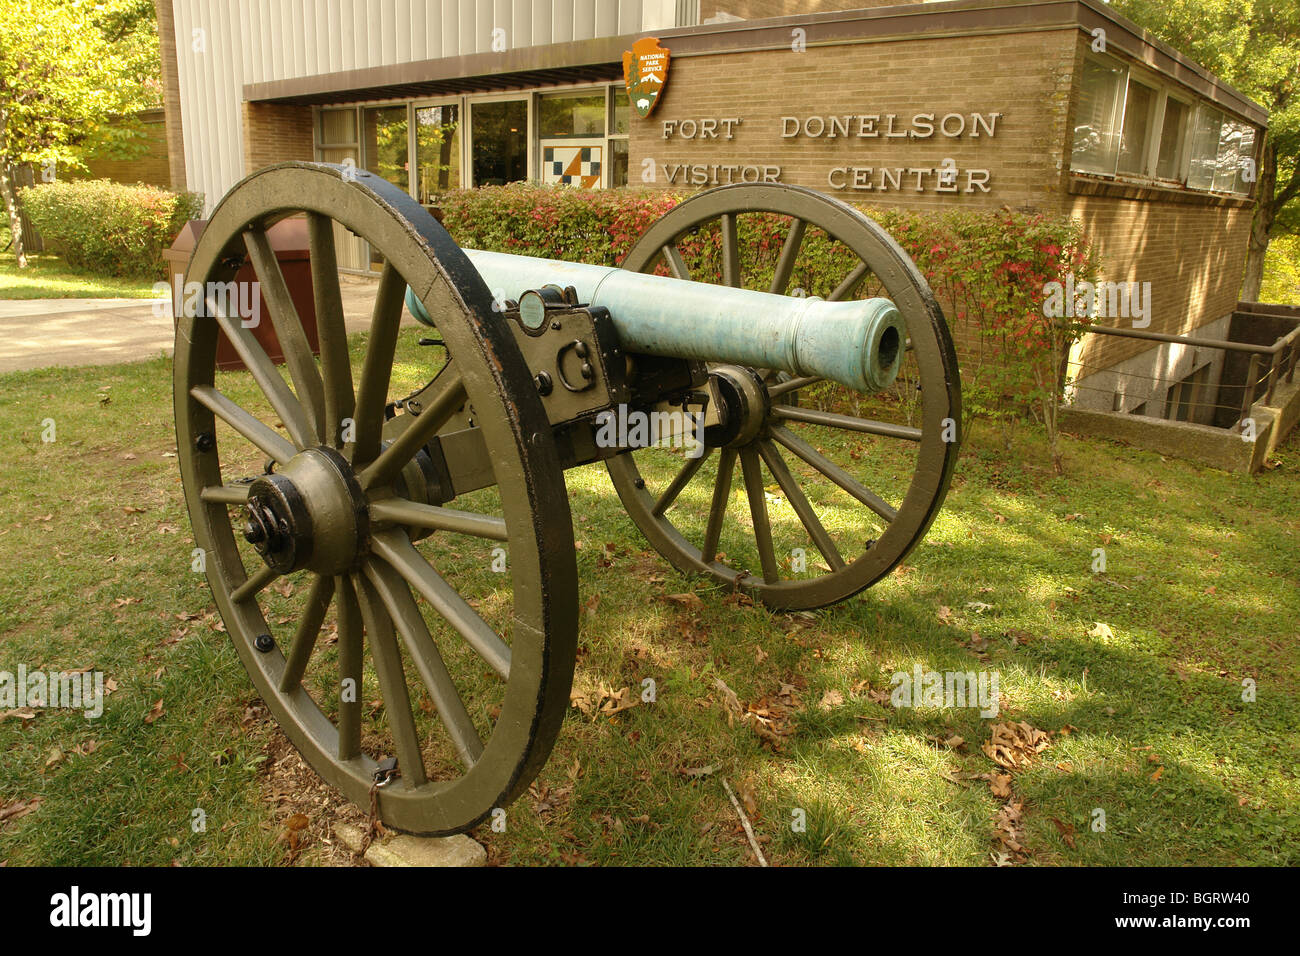 AJD62853, Fort Donelson National Battlefield, TN, Tennessee, cannone Foto Stock